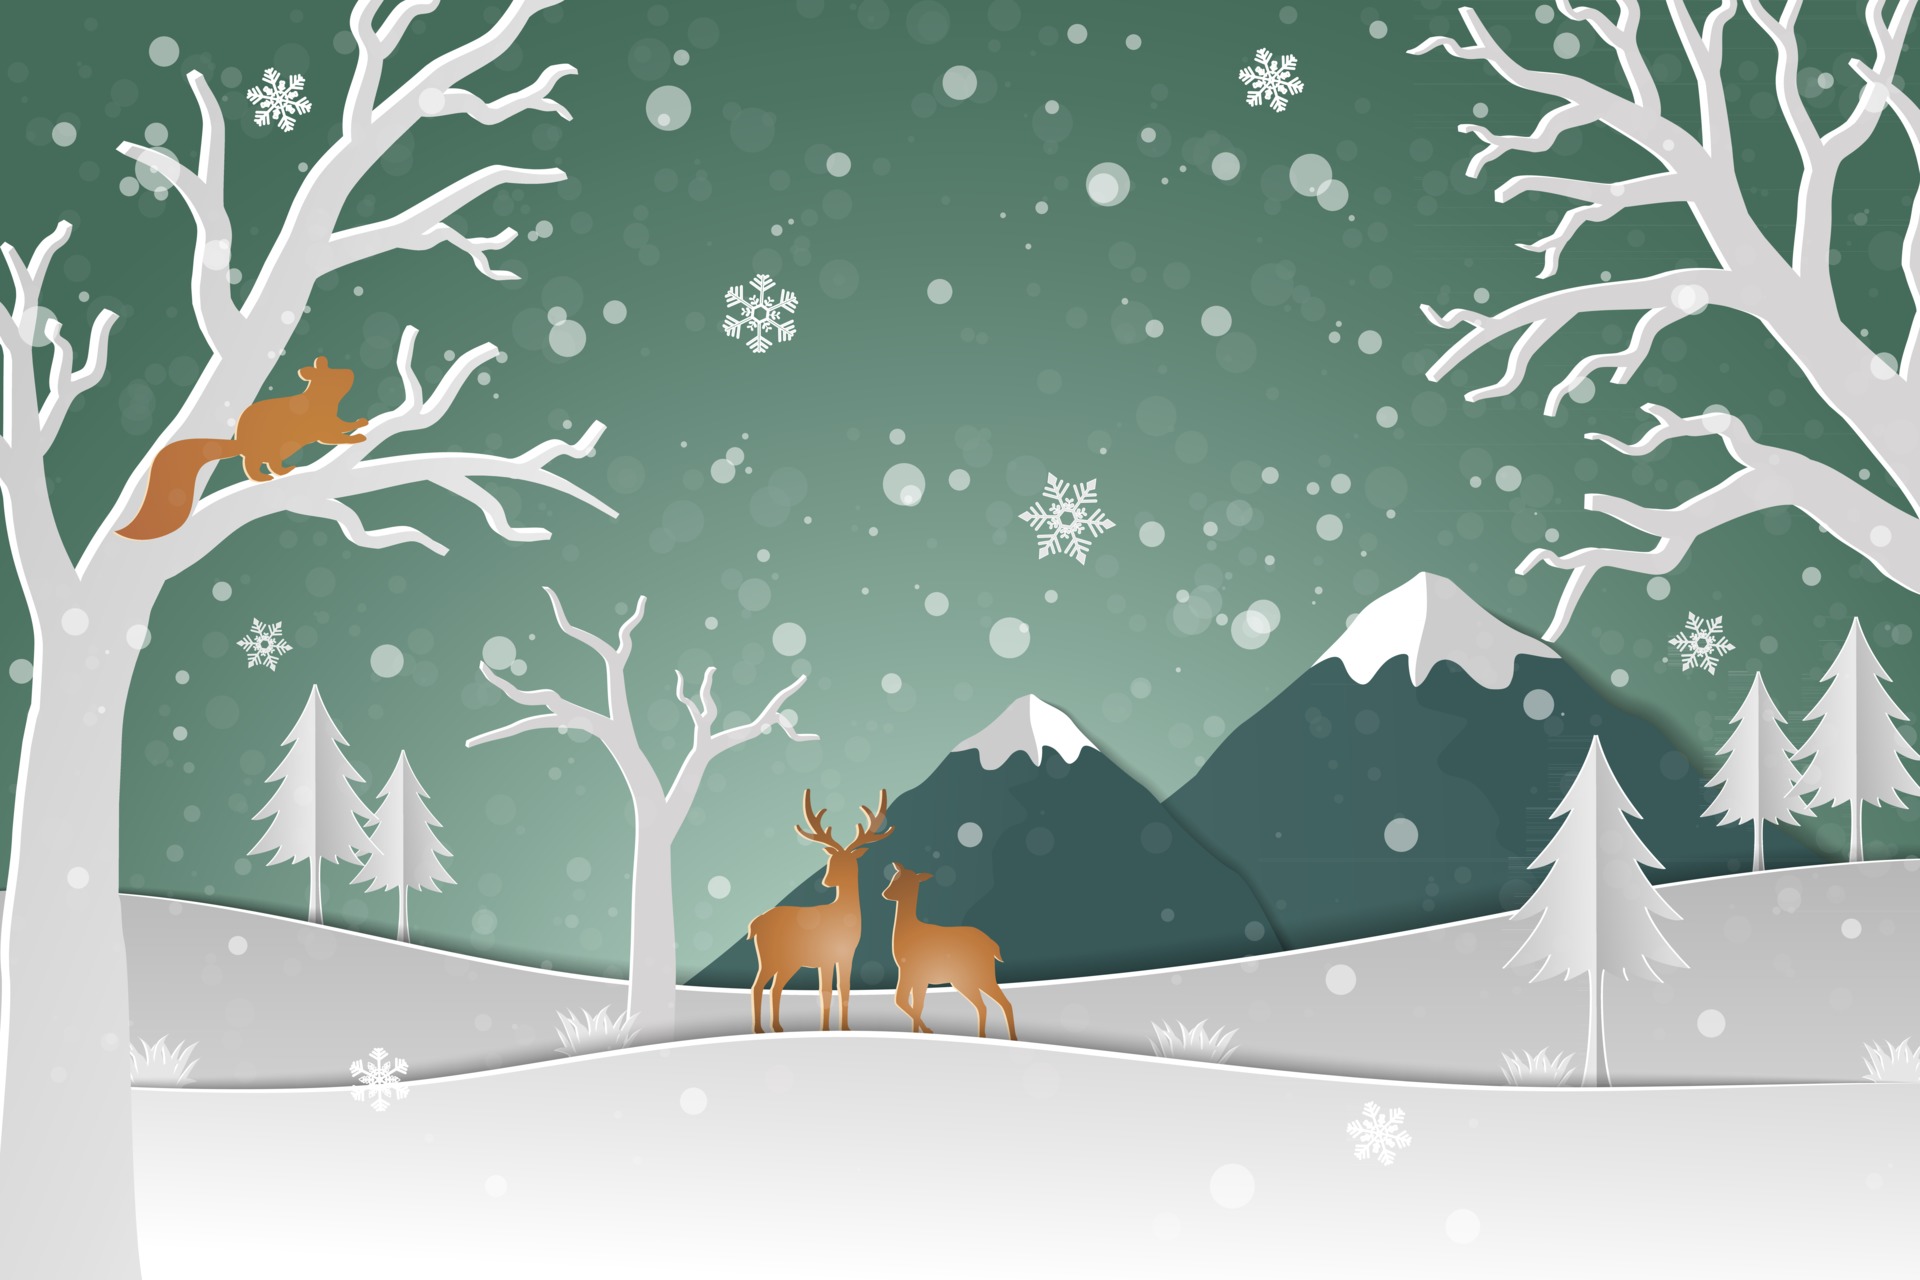 Deer family with winter snow in the forest abstract background Happy new year and Merry Christmas on paper art style